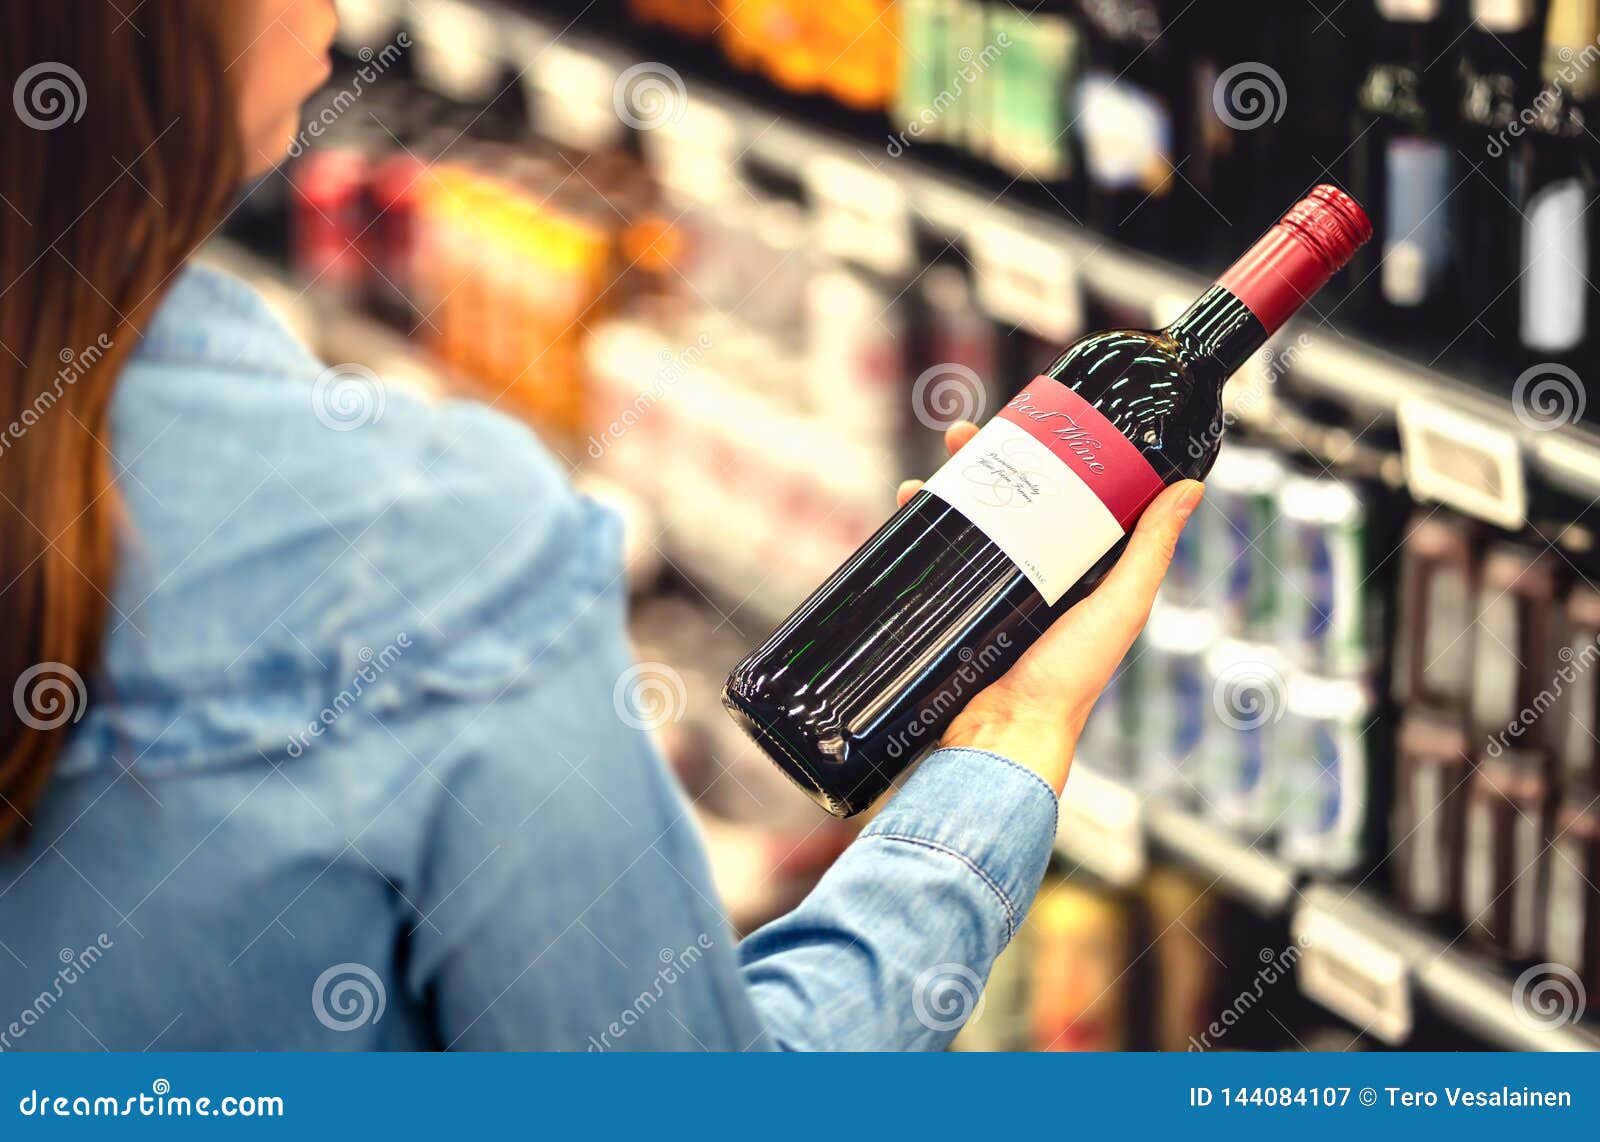 woman reading the label of red wine bottle in liquor store or alcohol section of supermarket. shelf full of alcoholic beverages.